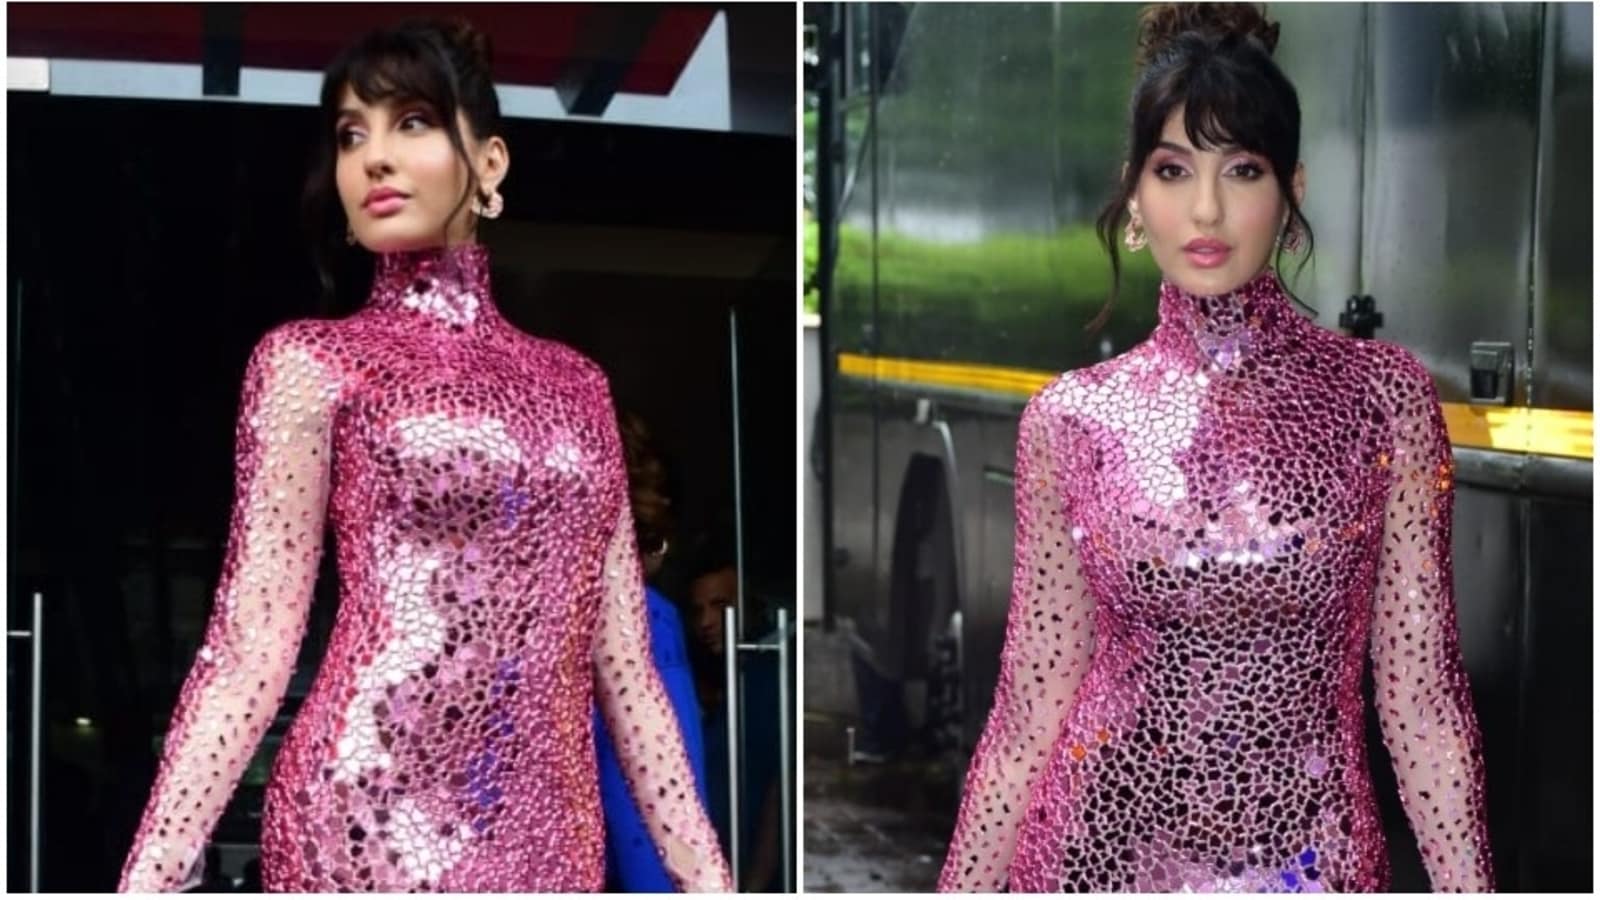 Nora Fatehi in figure-hugging gown cuts a sultry silhouette for Jhalak Dikhhla Jaa 10 shoot: See pics, video